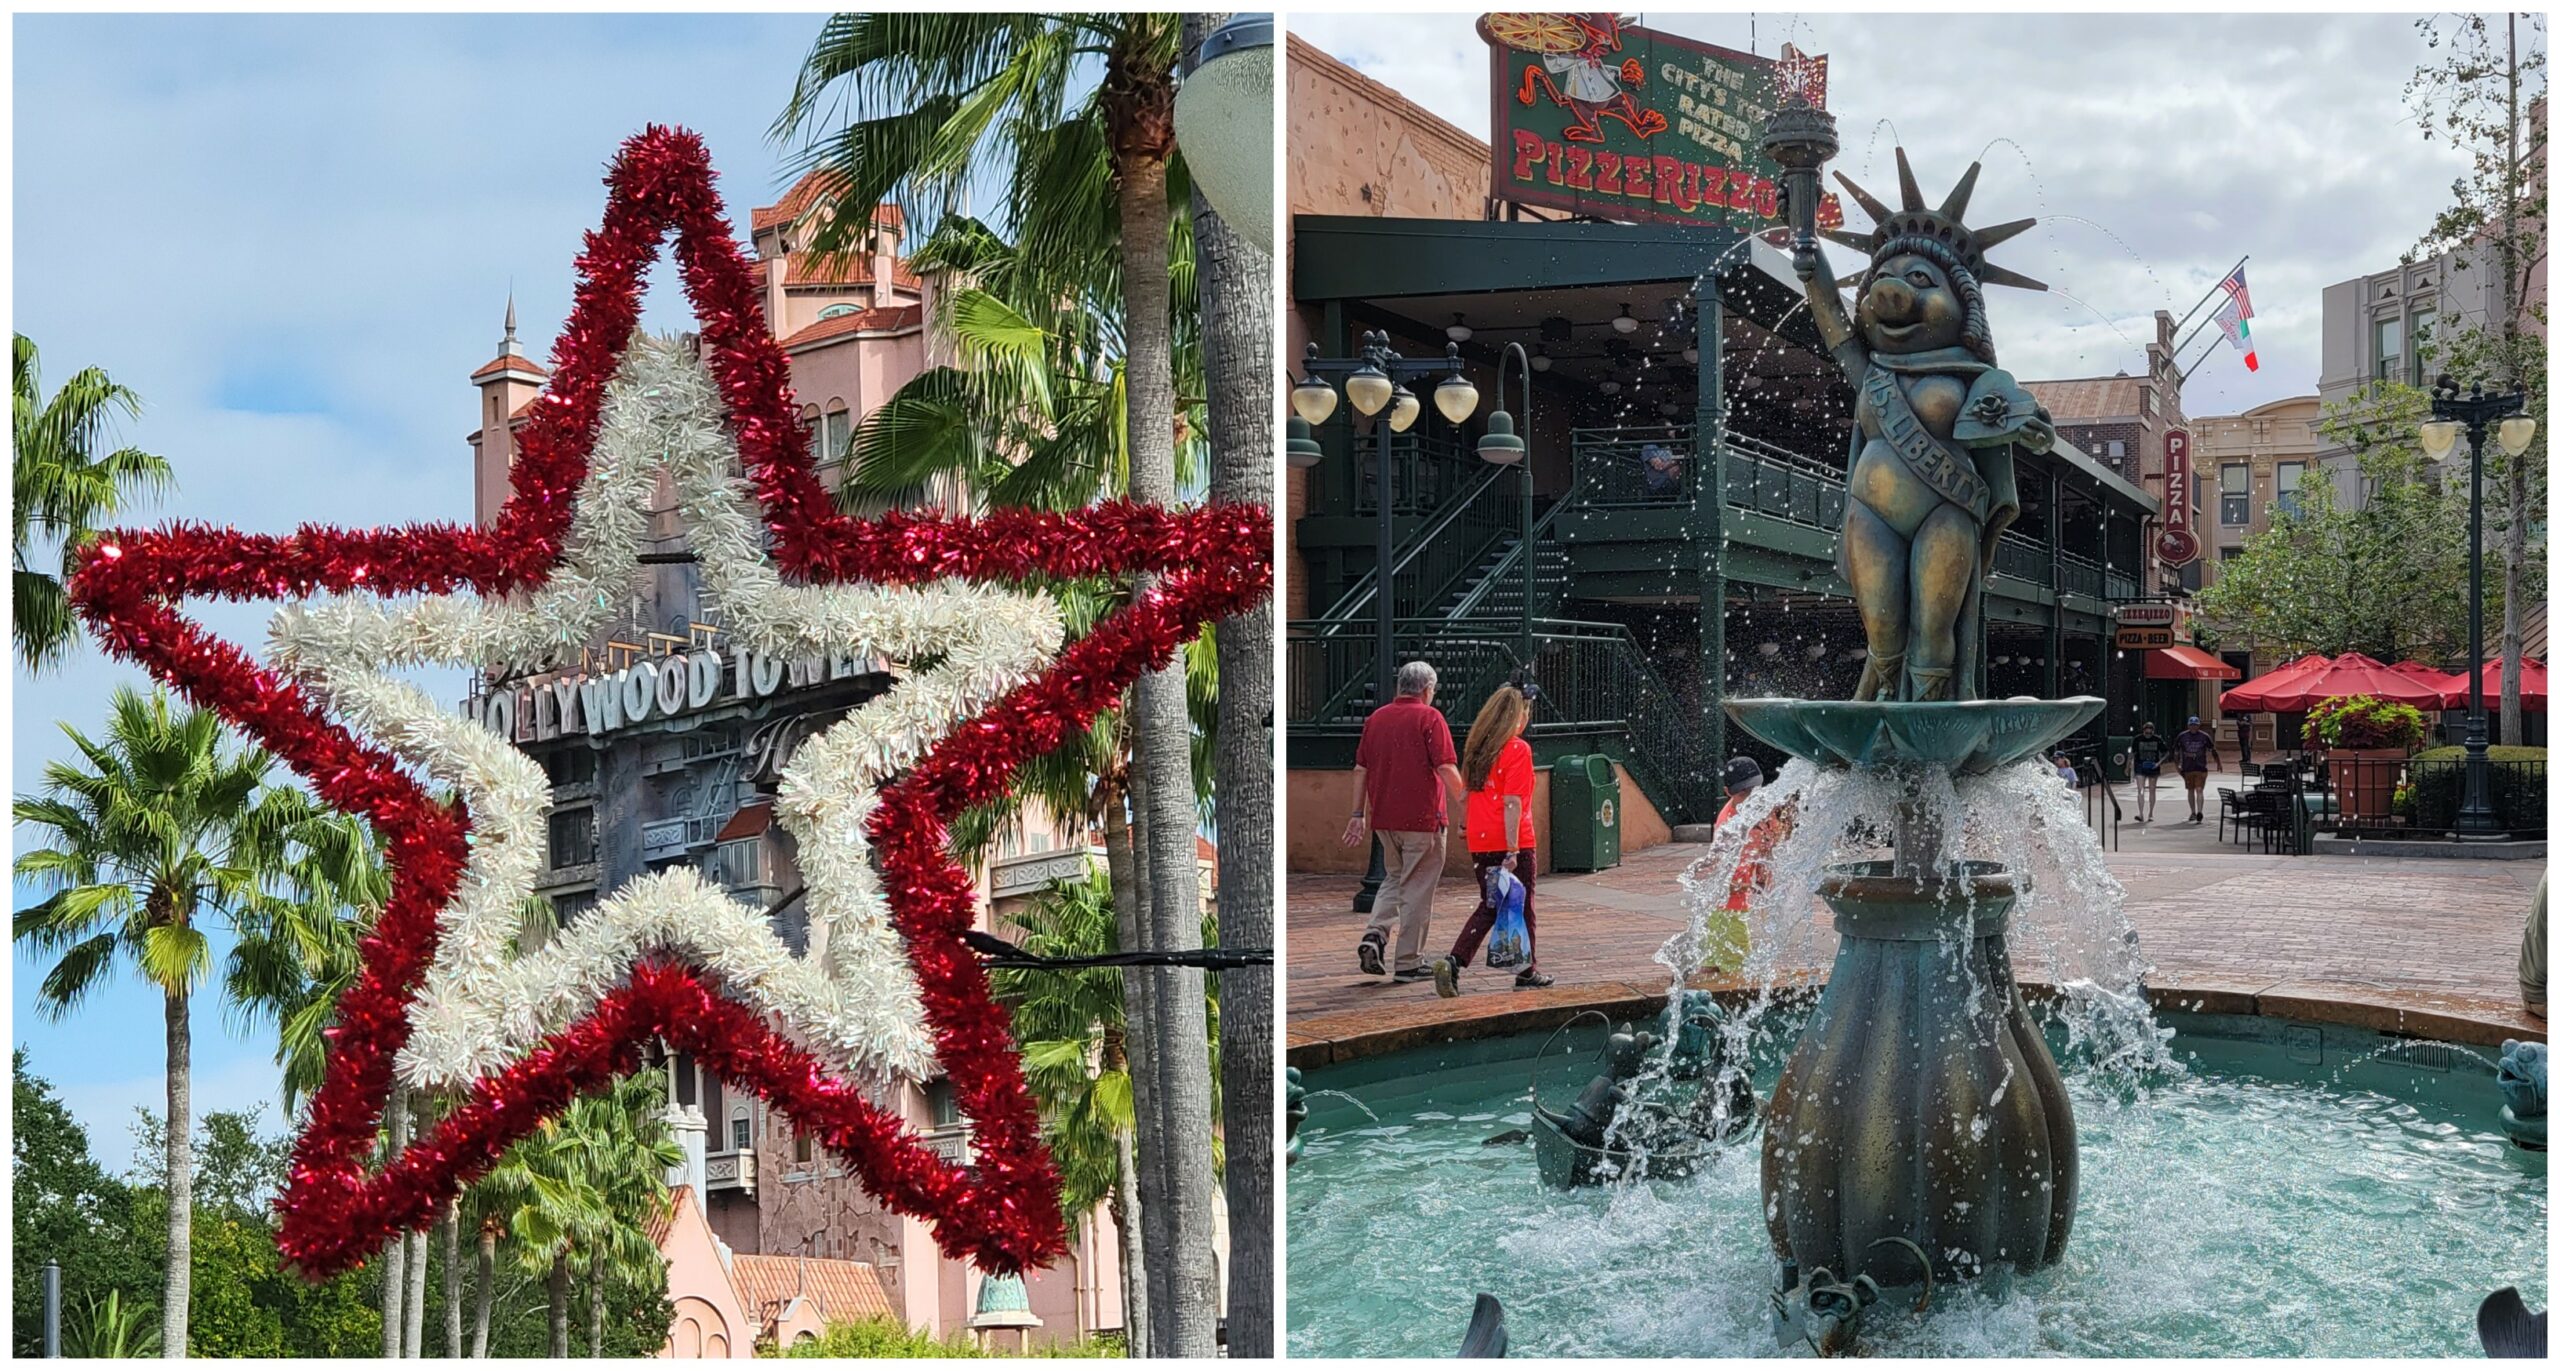 What's New in Merchandise and Going On at Disney's Hollywood Studios Today